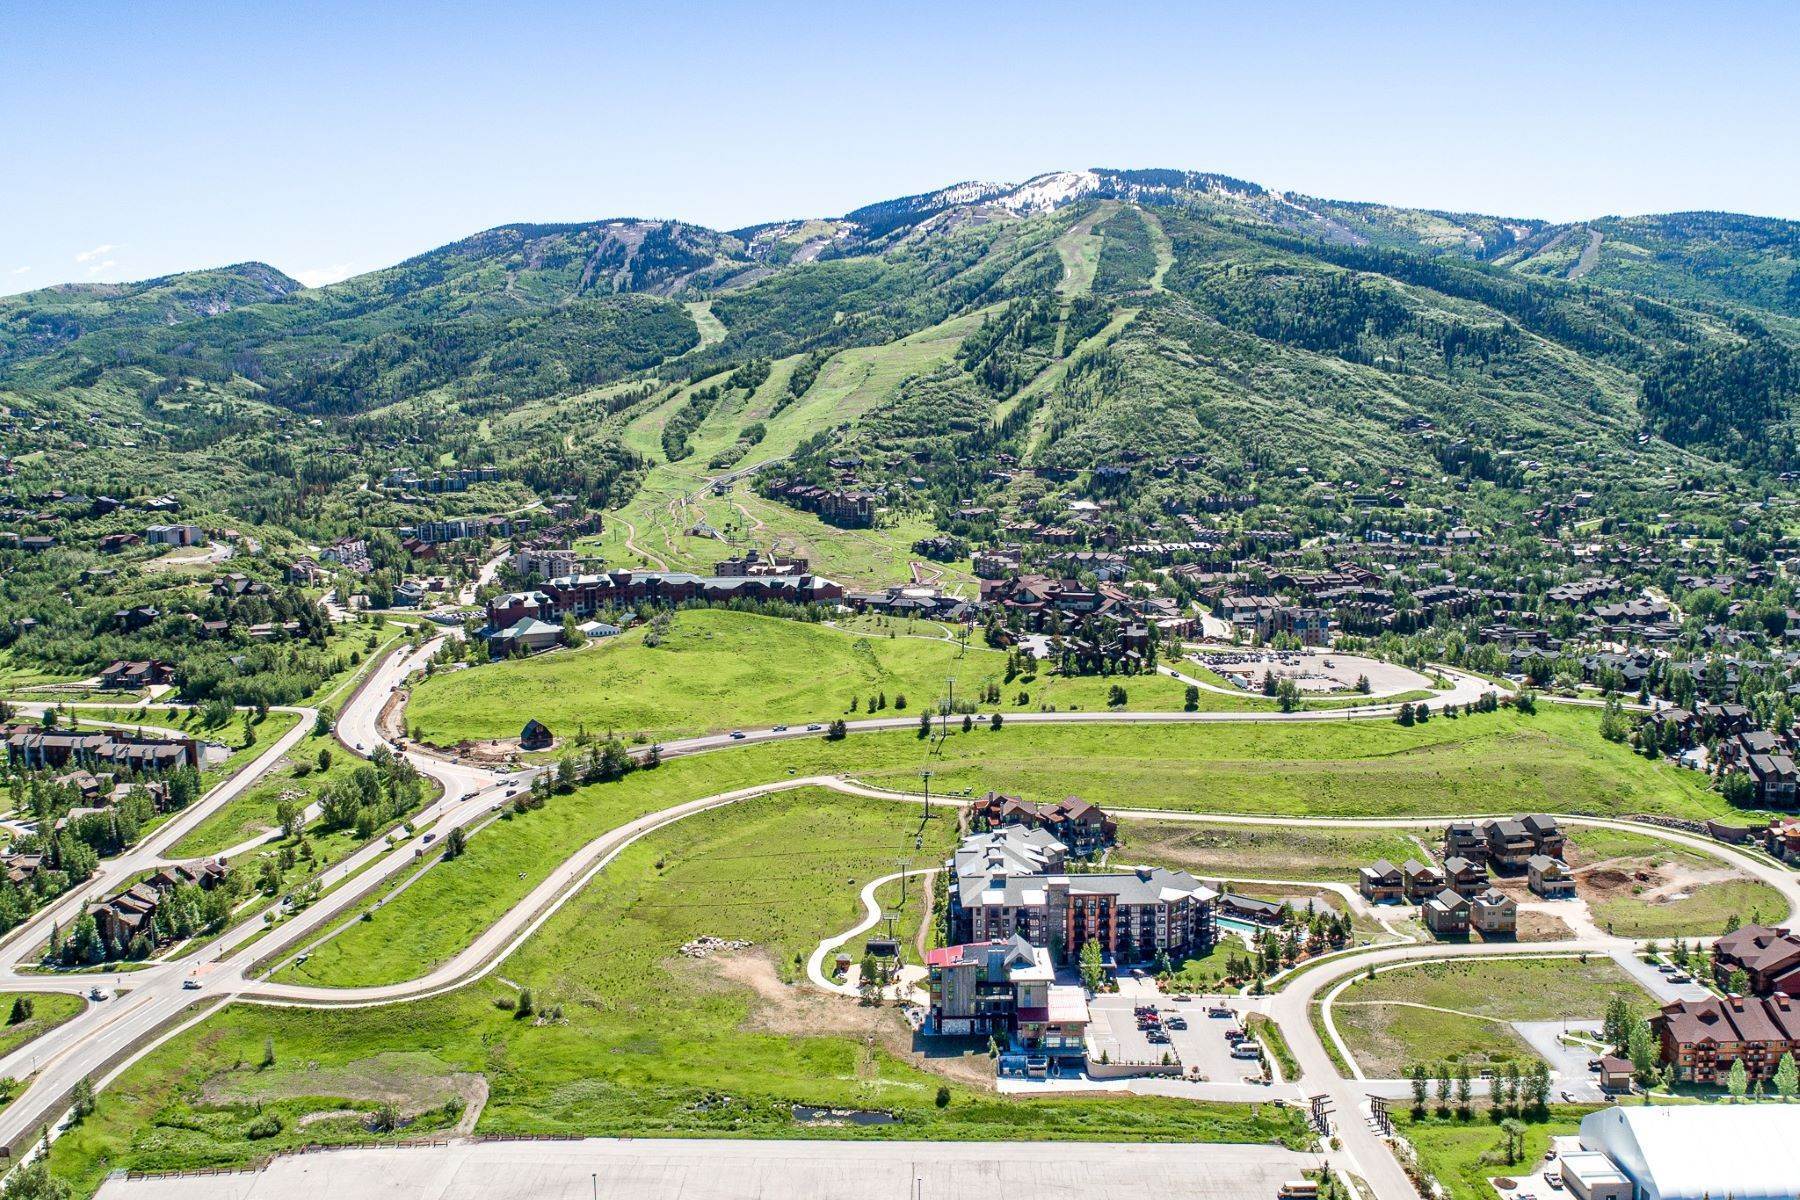 Property for Sale at 1200 Mt Werner Road, Steamboat Springs, CO, 80487 1200 Mt Werner Road Steamboat Springs, Colorado 80487 United States